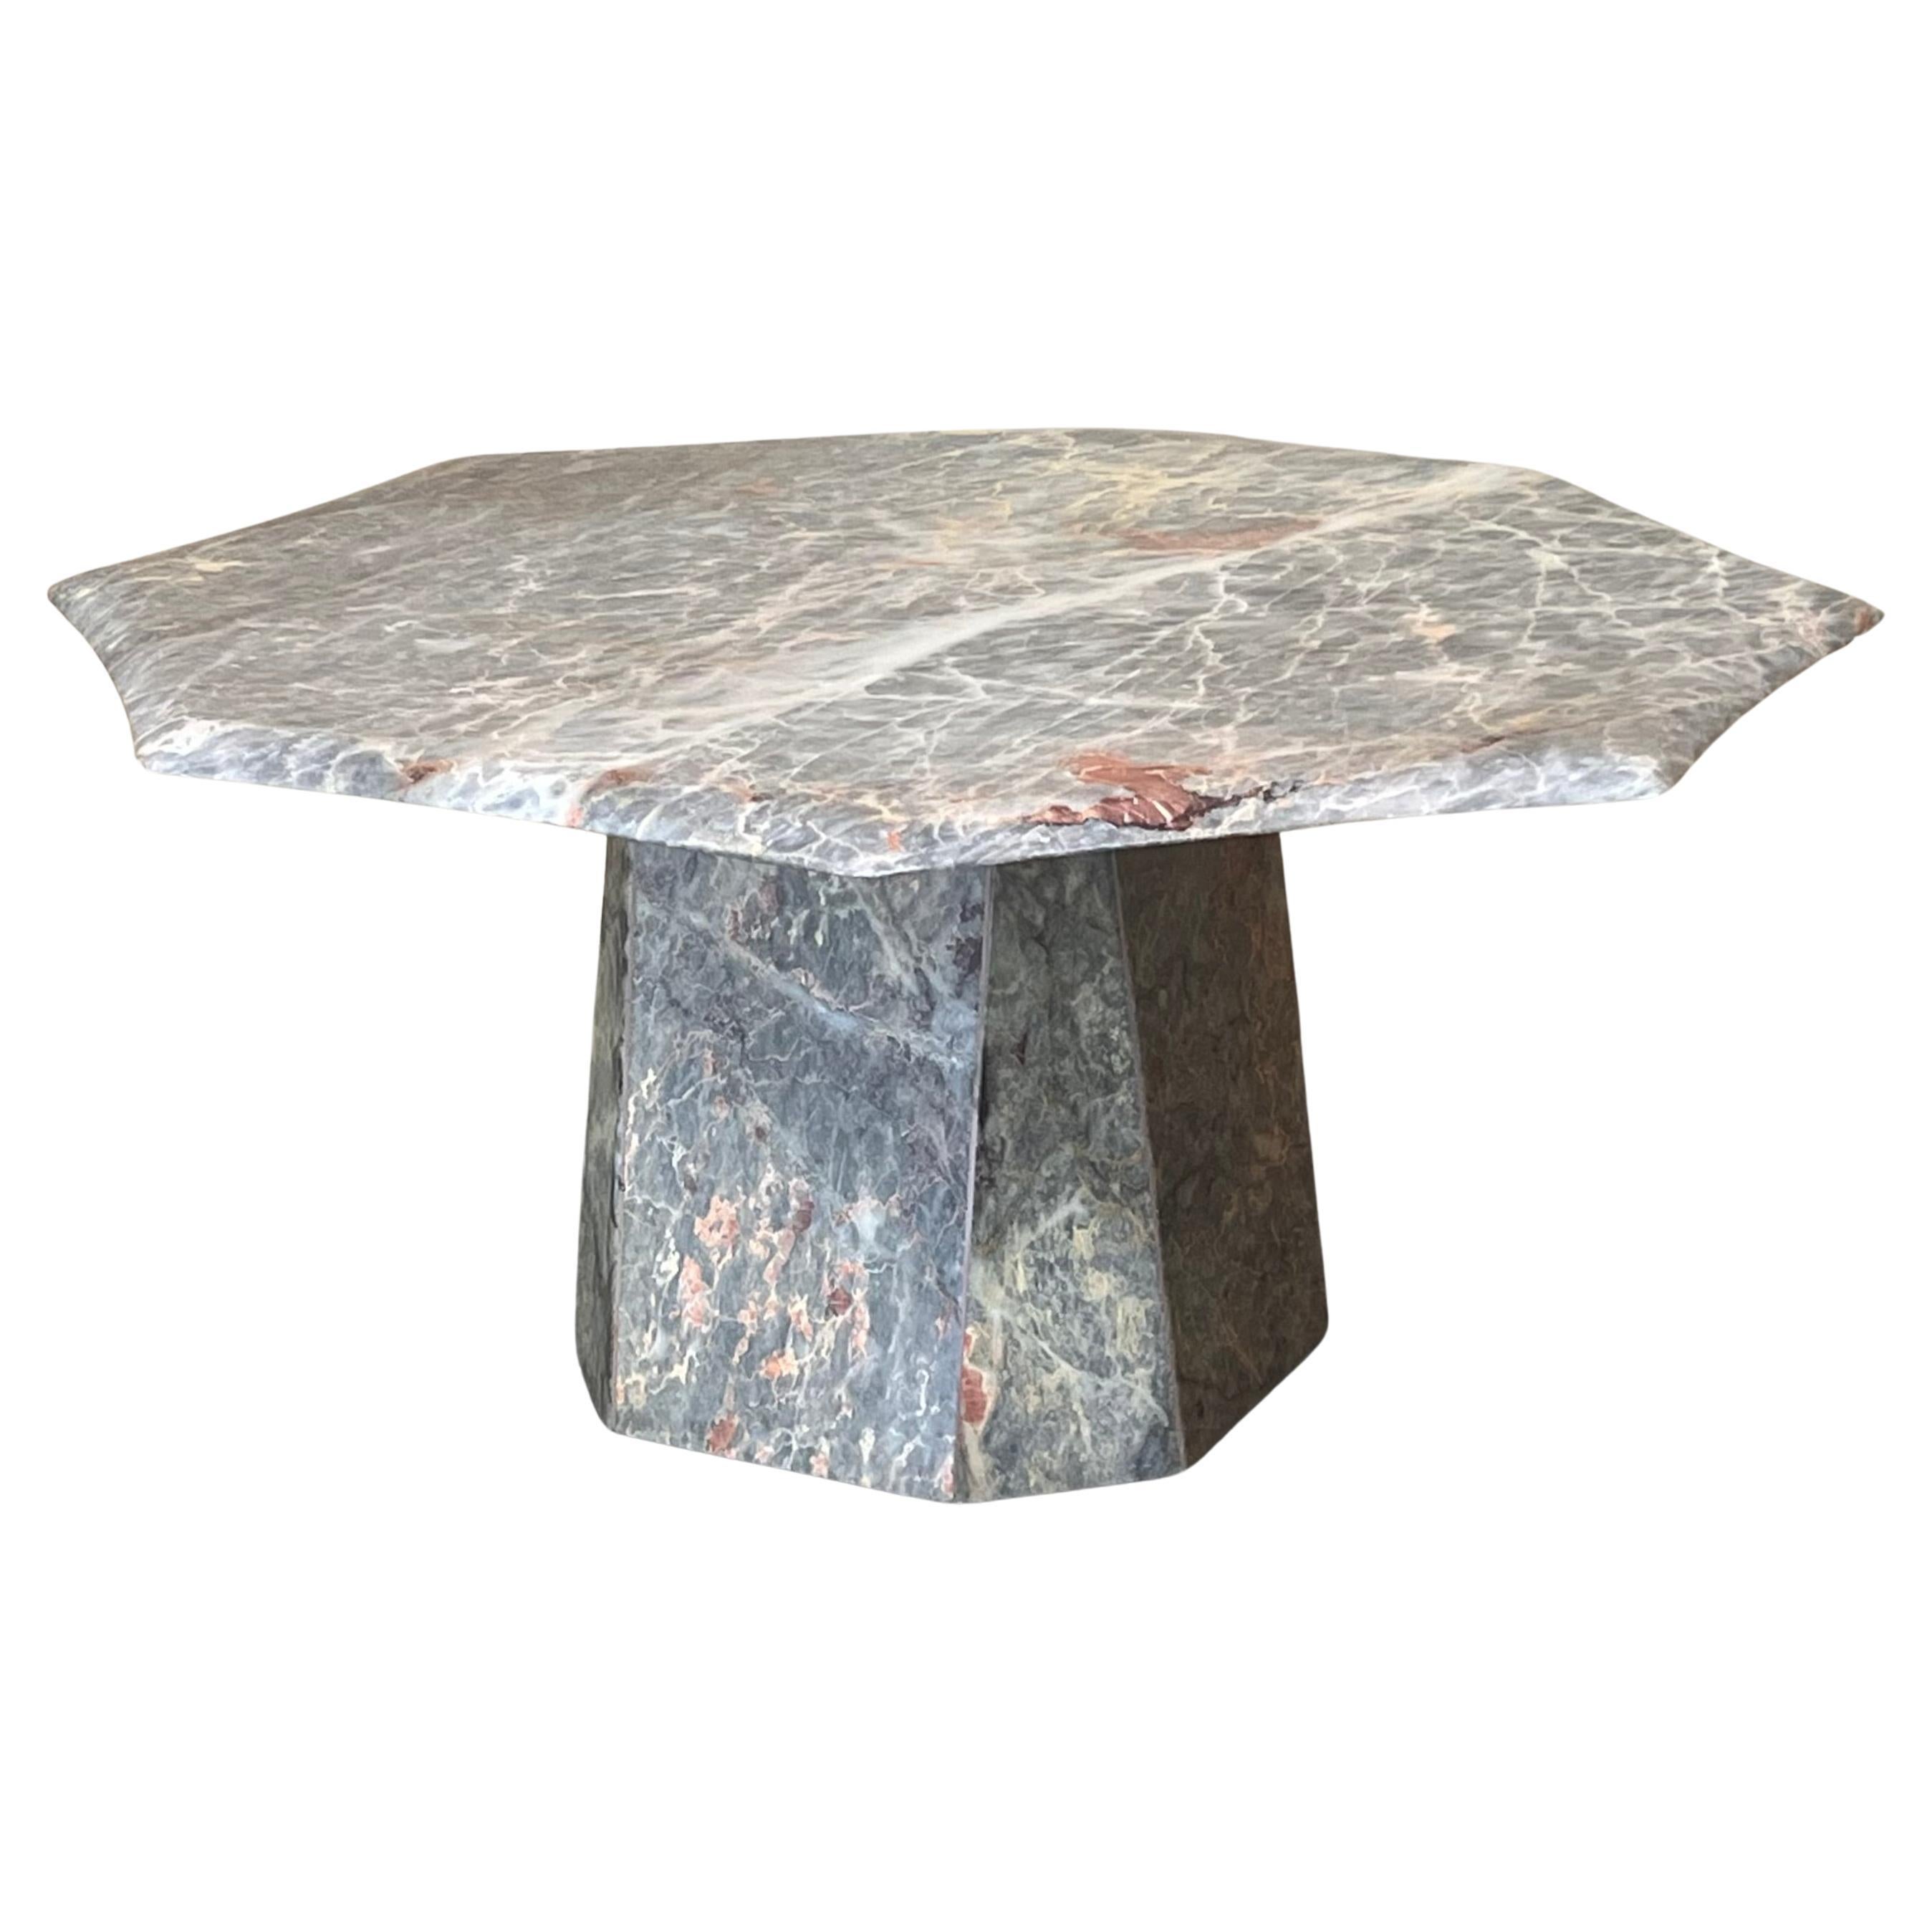 1970s Substantial White, Grey, Black, Pink Marble Coffee Table, sculptural Base